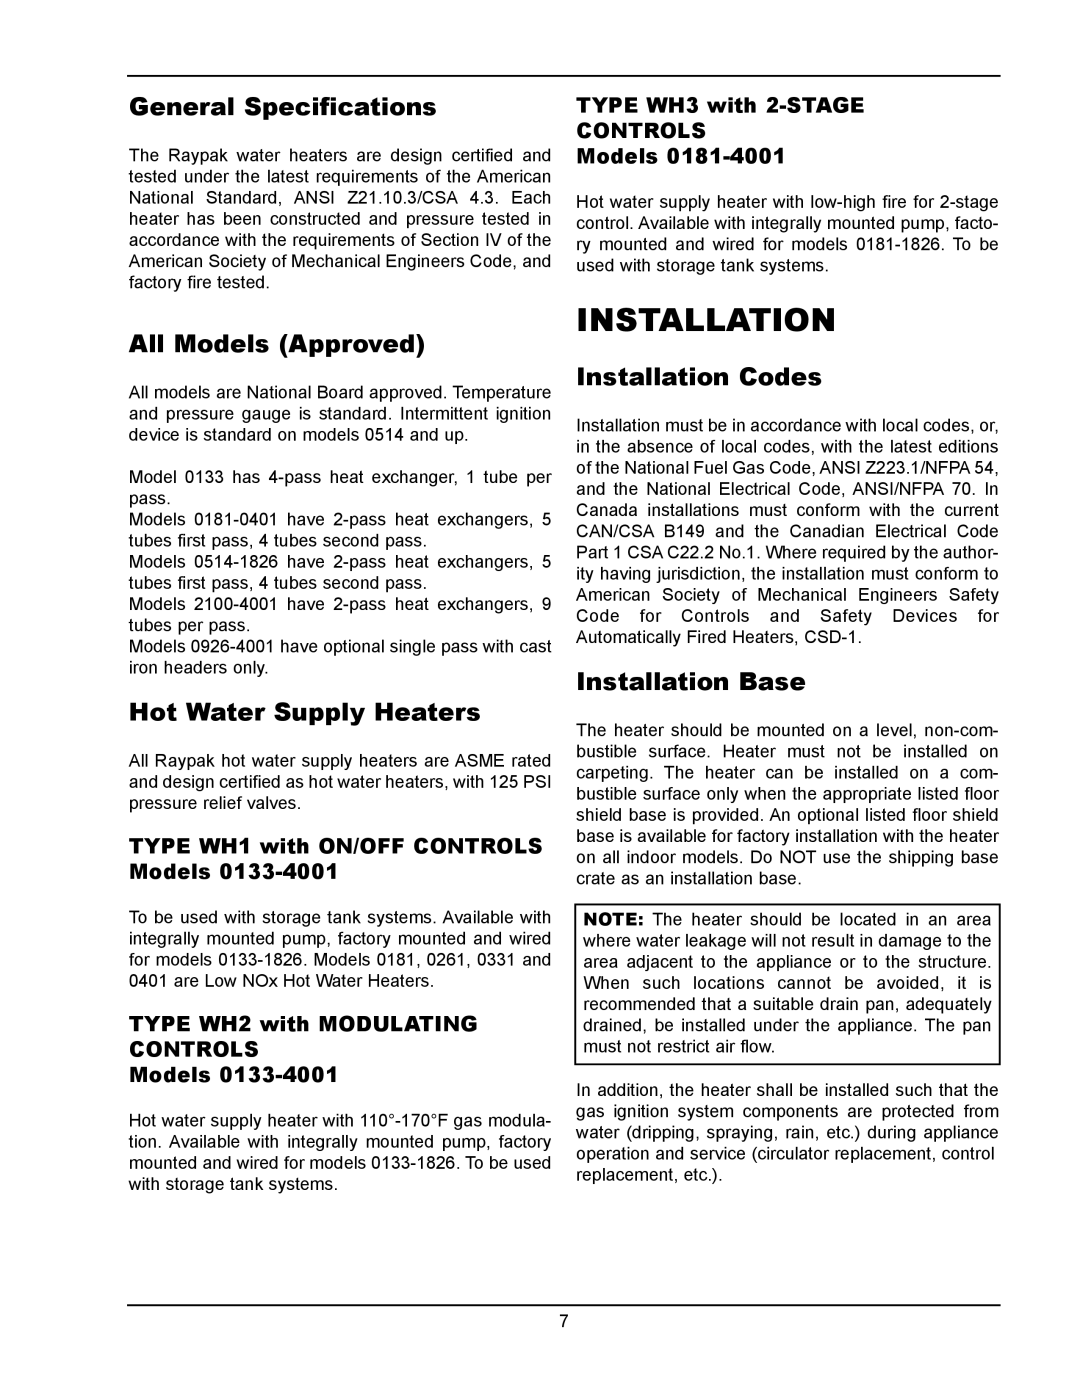 Raypak 1334001 General Specifications, All Models Approved, Hot Water Supply Heaters, Installation Codes 